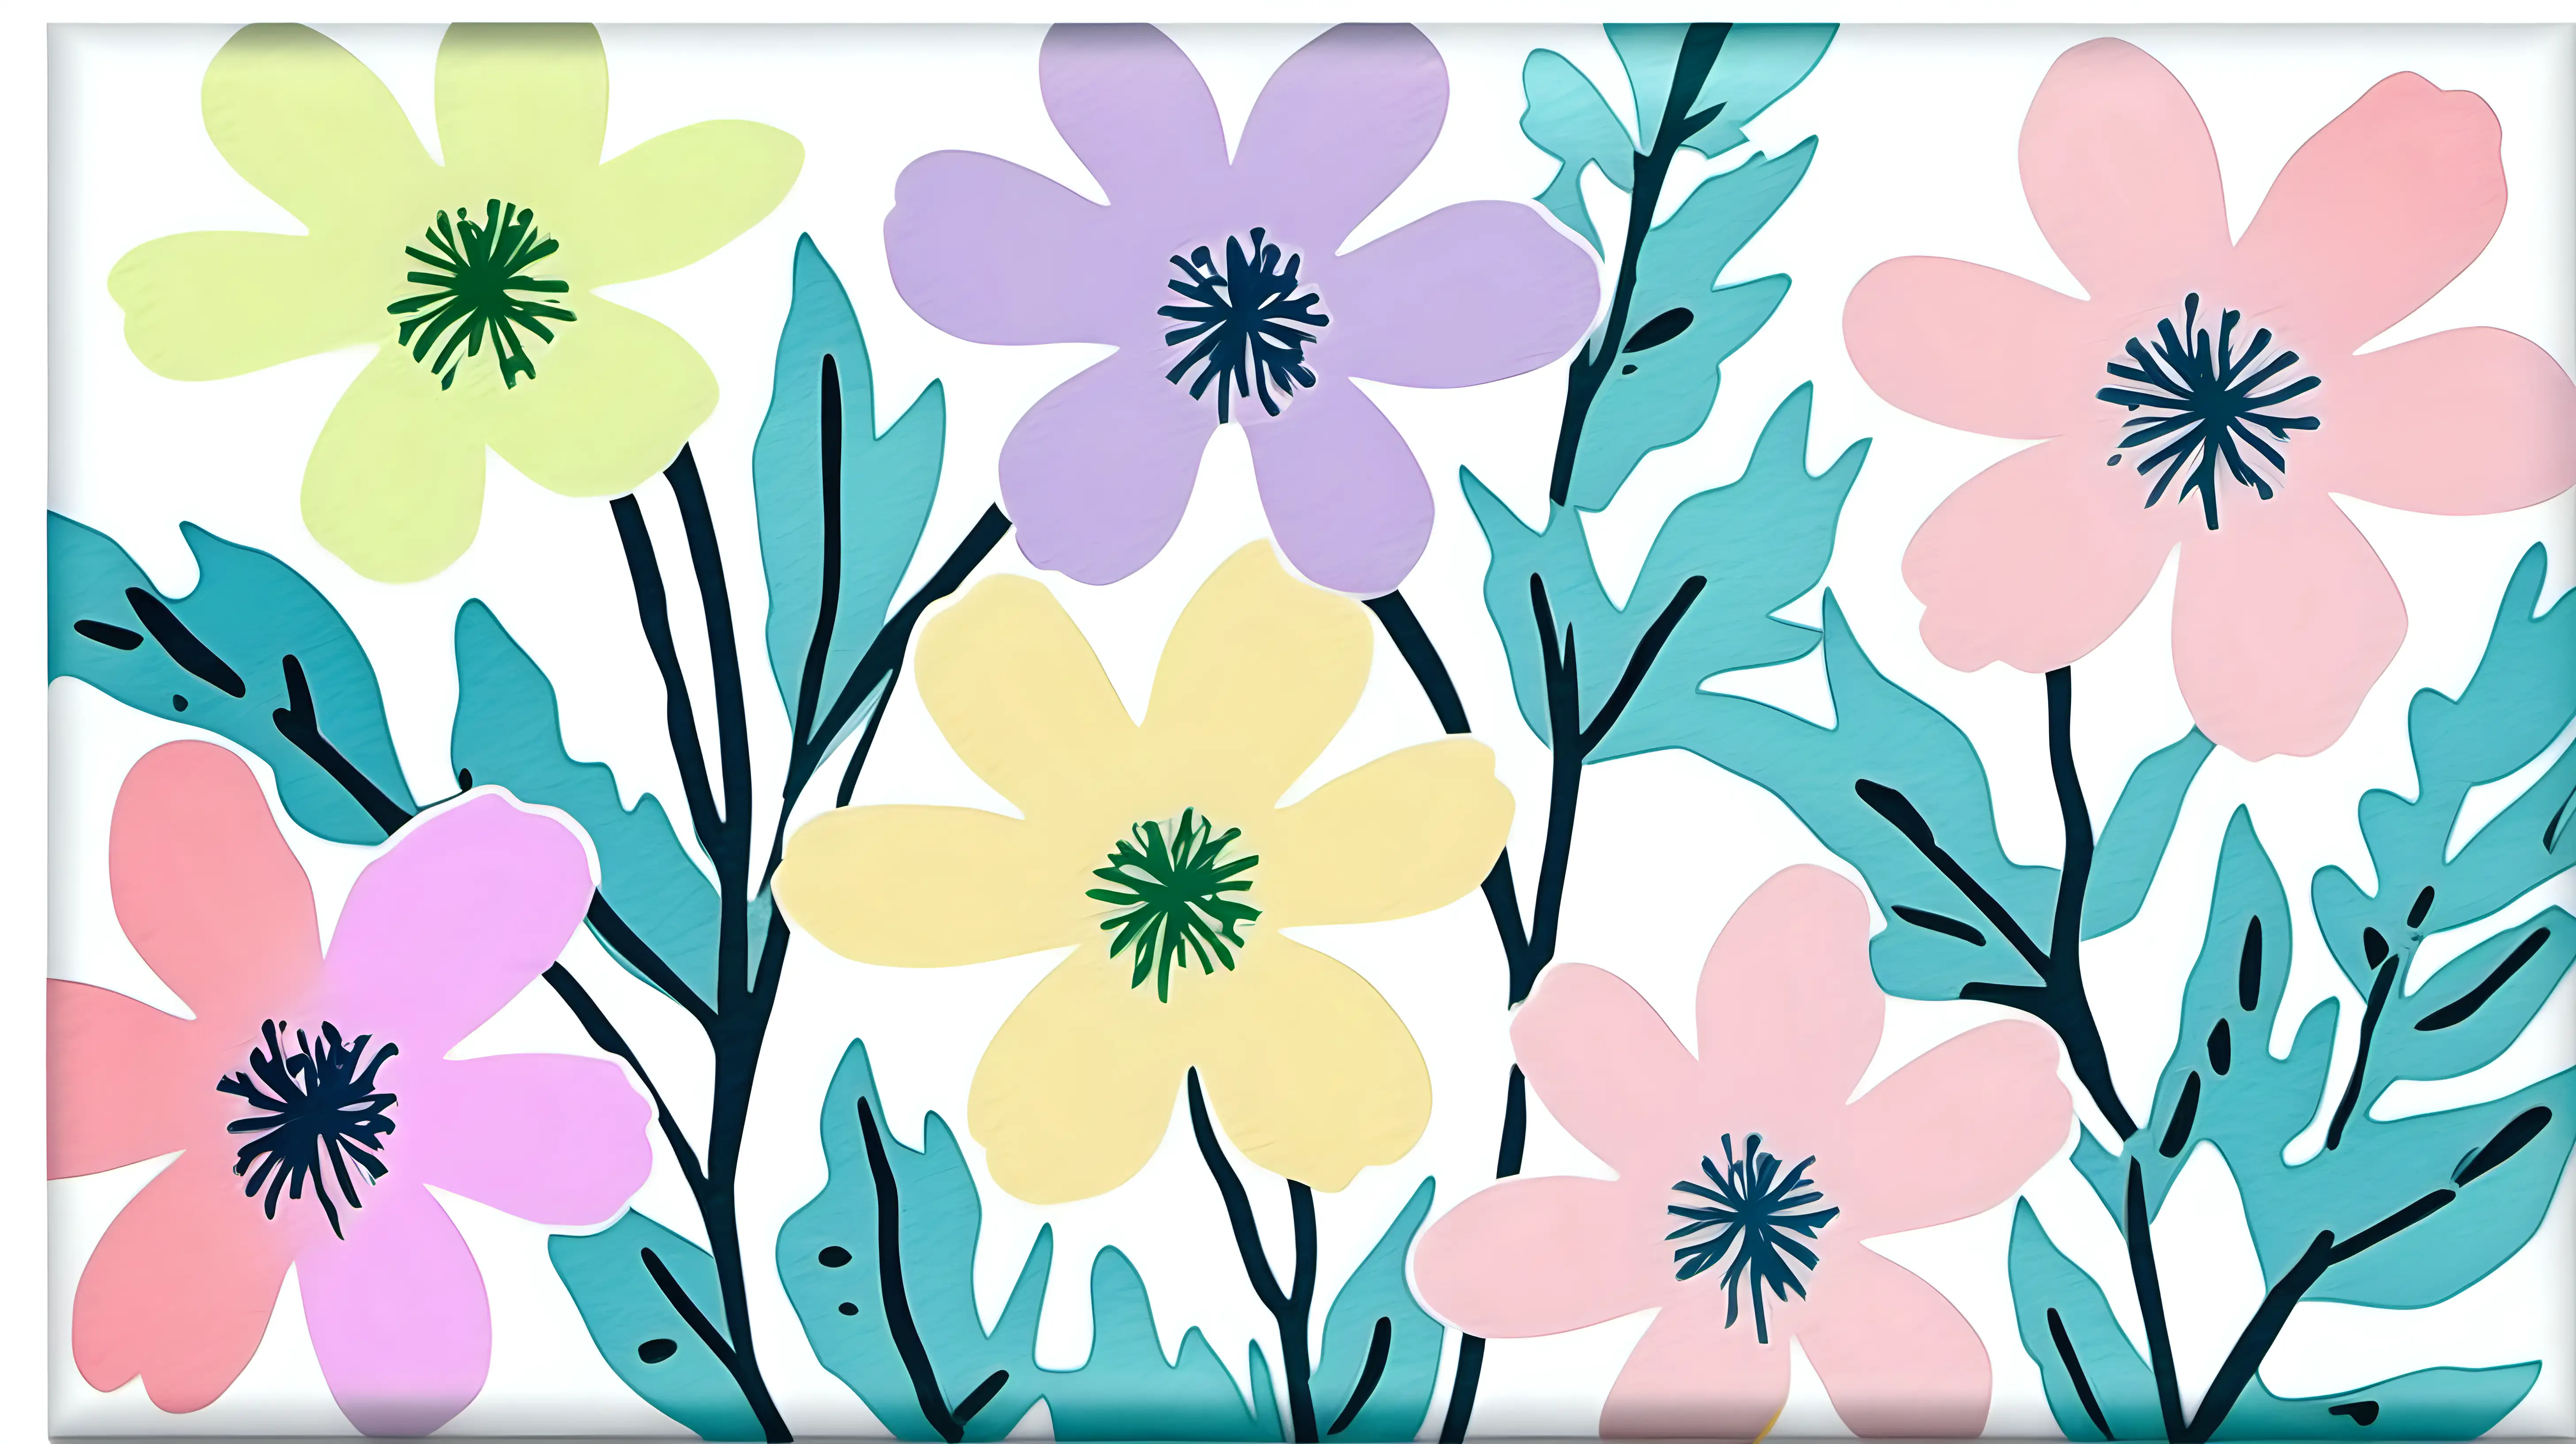 Pastel Watercolor Paperbush Flowers Clipart on a White Background Andy Warhol Inspired Art